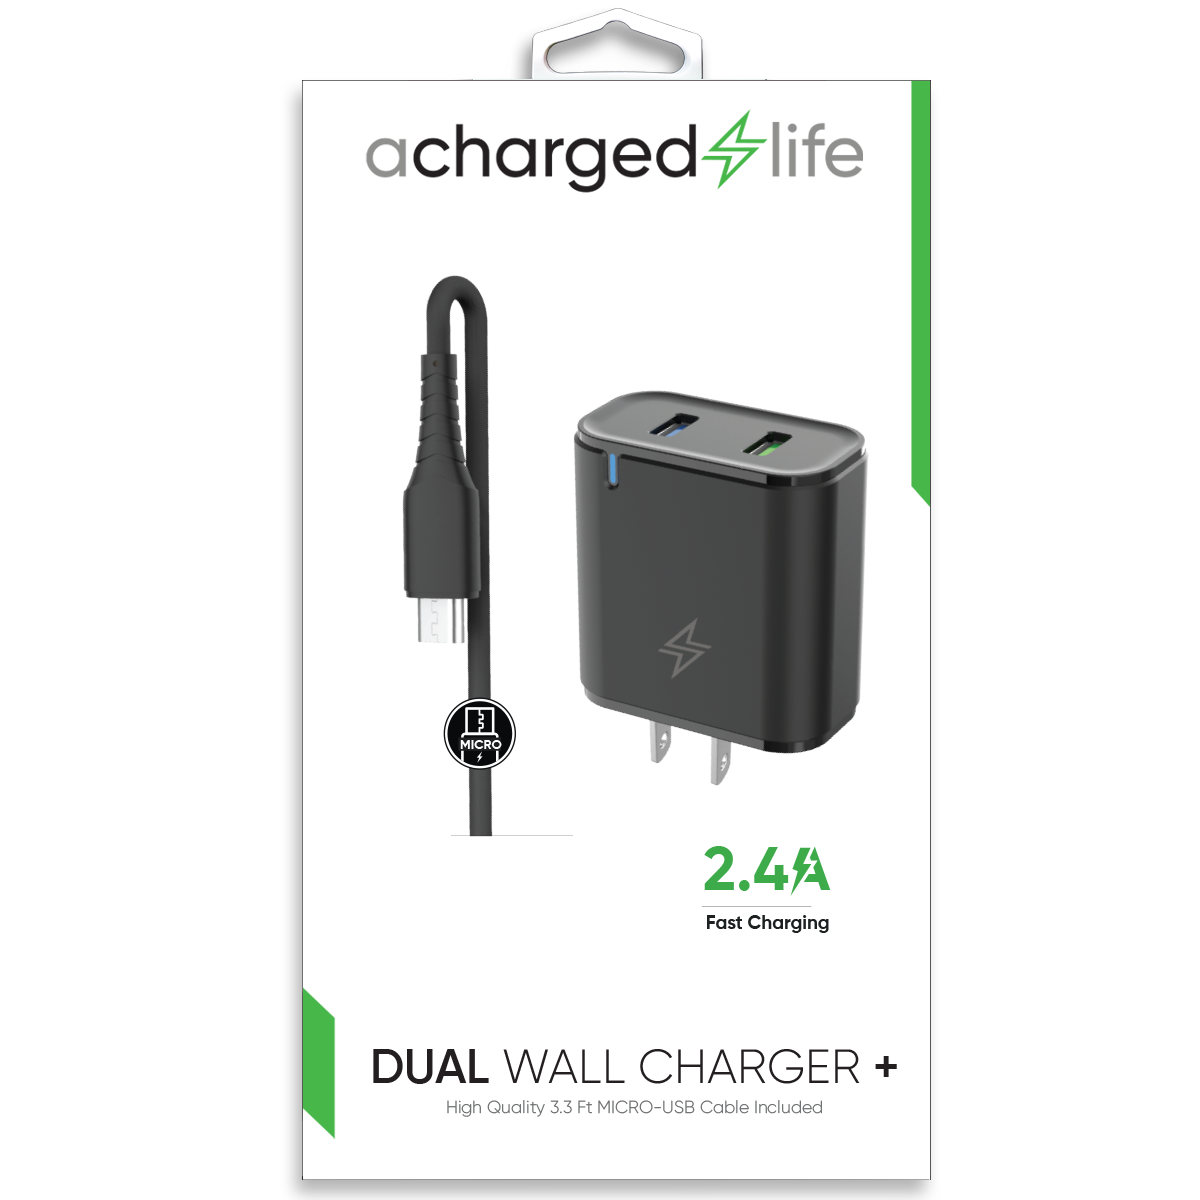 CL603B - Charging Cable Micro USB 3.3Ft w/Wall Charger 2.4A Black